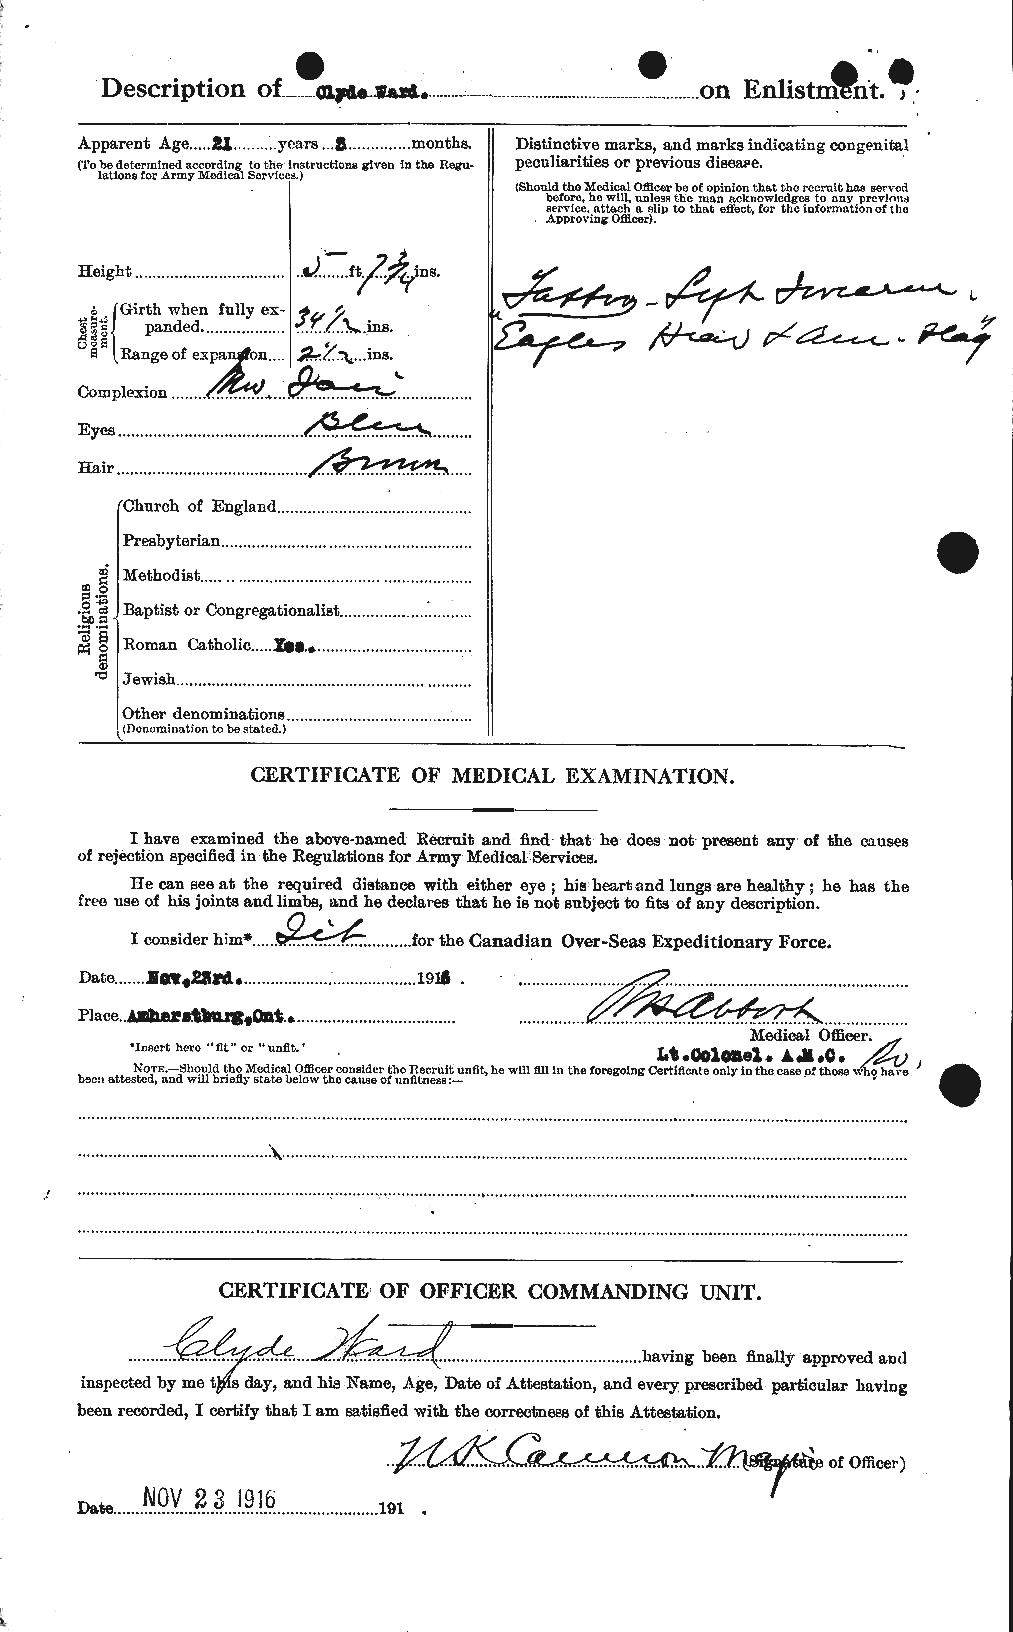 Personnel Records of the First World War - CEF 657610b